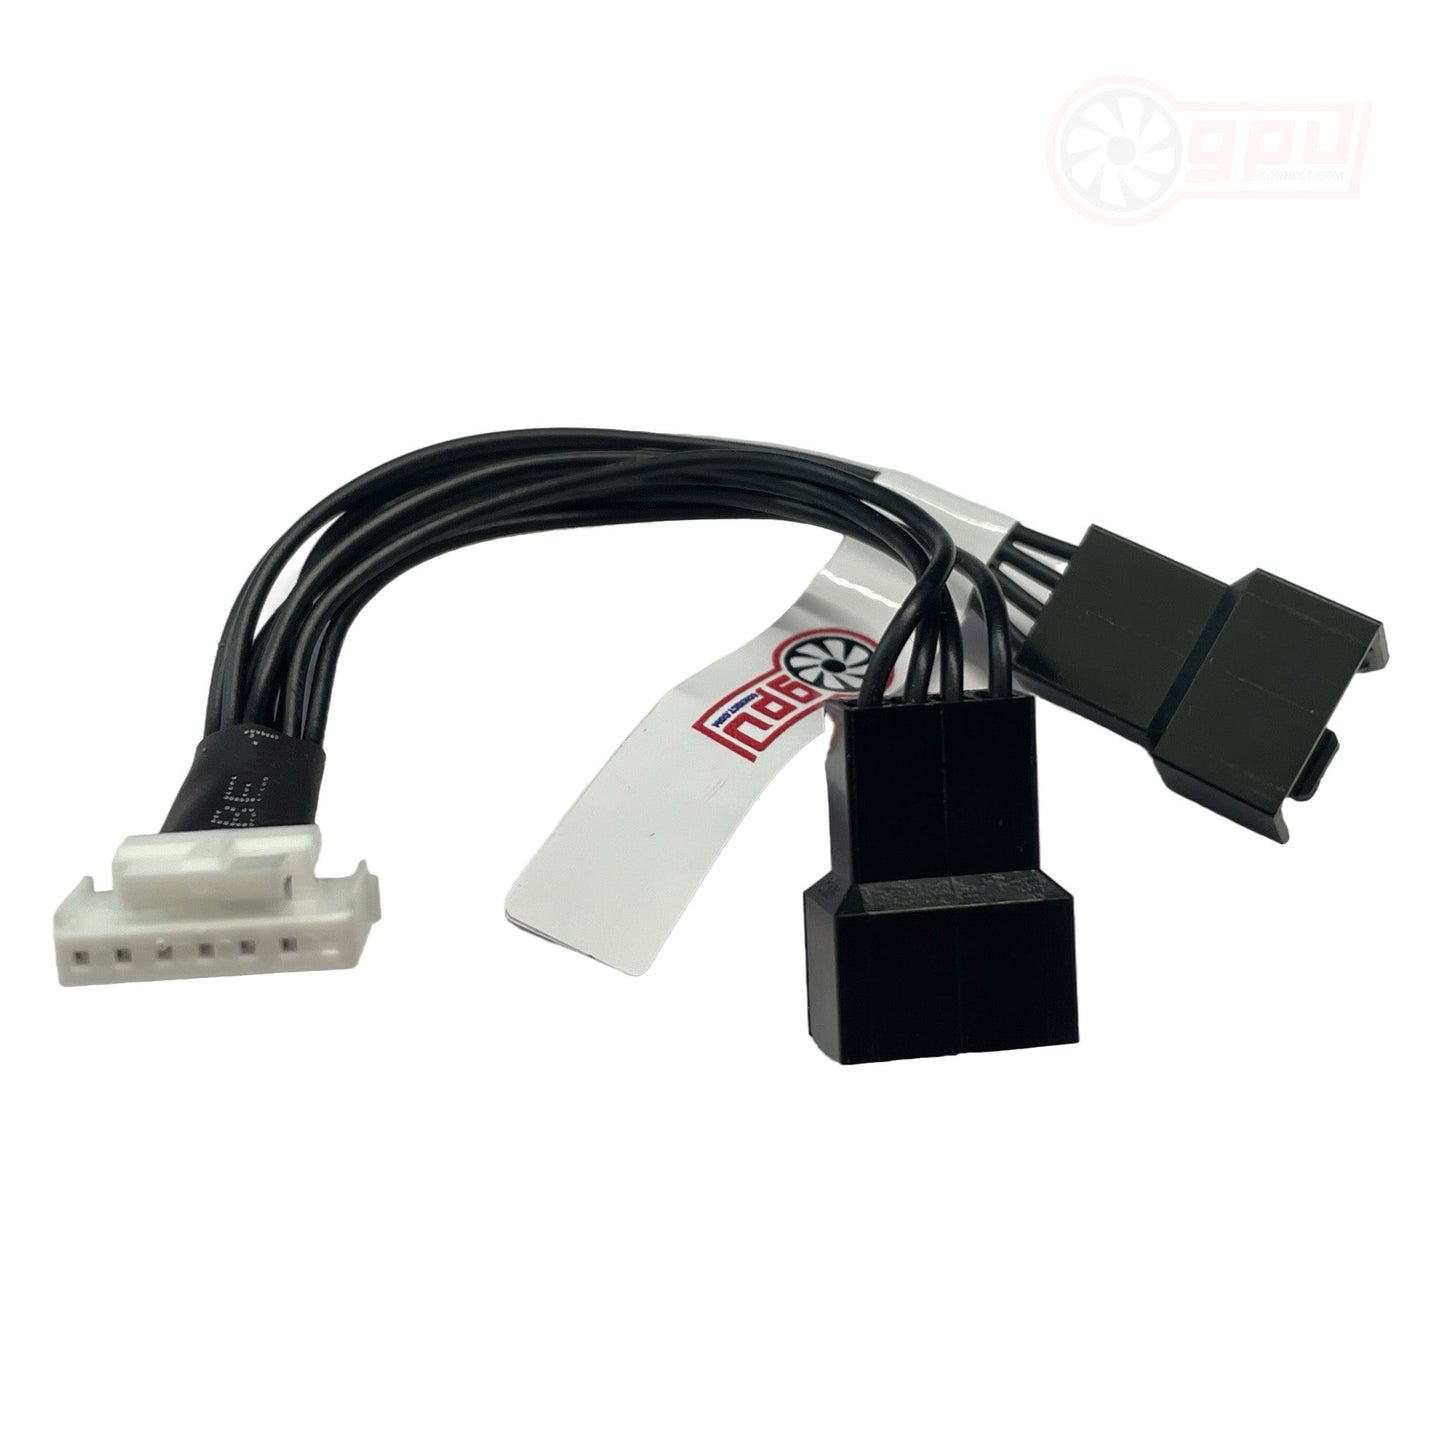 Asus RTX 4070 DUAL Deshroud Cable 7 Pin to 4 Pin Adapter - GPUCONNECT.COM